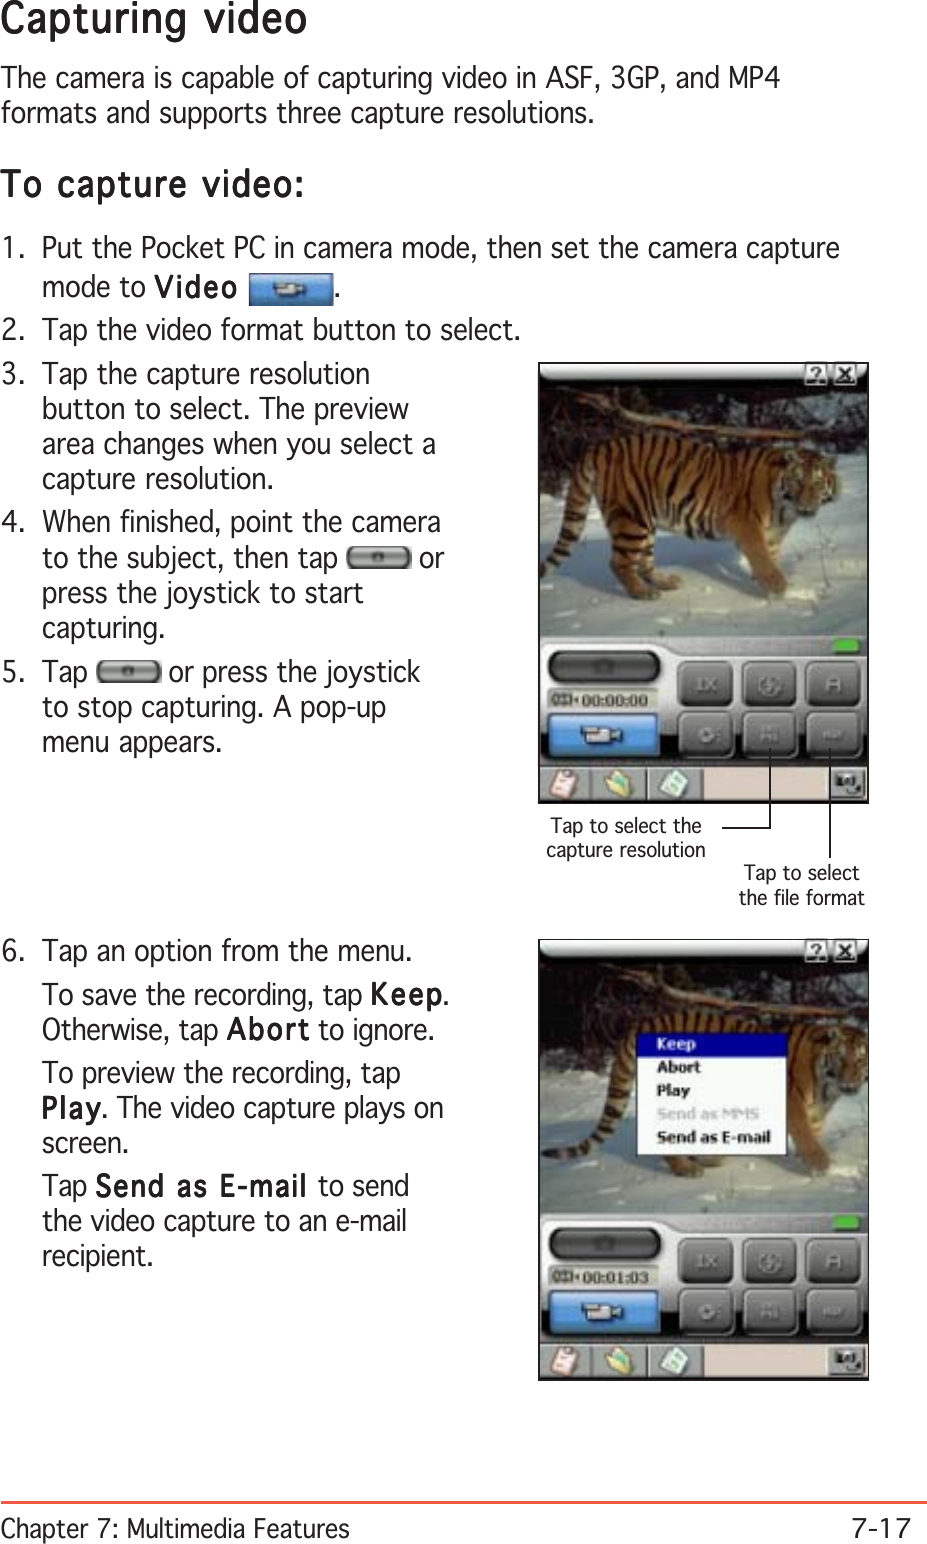 Chapter 7: Multimedia Features7-17Capturing videoCapturing videoCapturing videoCapturing videoCapturing videoThe camera is capable of capturing video in ASF, 3GP, and MP4formats and supports three capture resolutions.To capture video:To capture video:To capture video:To capture video:To capture video:1. Put the Pocket PC in camera mode, then set the camera capturemode to VideoVideoVideoVideoVideo .2. Tap the video format button to select.3. Tap the capture resolutionbutton to select. The previewarea changes when you select acapture resolution.4. When finished, point the camerato the subject, then tap   orpress the joystick to startcapturing.5. Tap   or press the joystickto stop capturing. A pop-upmenu appears.6. Tap an option from the menu.To save the recording, tap KeepKeepKeepKeepKeep.Otherwise, tap AbortAbortAbortAbortAbo rt to ignore.To preview the recording, tapPlayPlayPlayPlayPl a y. The video capture plays onscreen.Tap Send as E-mail Send as E-mail Send as E-mail Send as E-mail Send as E-mail to sendthe video capture to an e-mailrecipient.Tap to selectthe file formatTap to select thecapture resolution